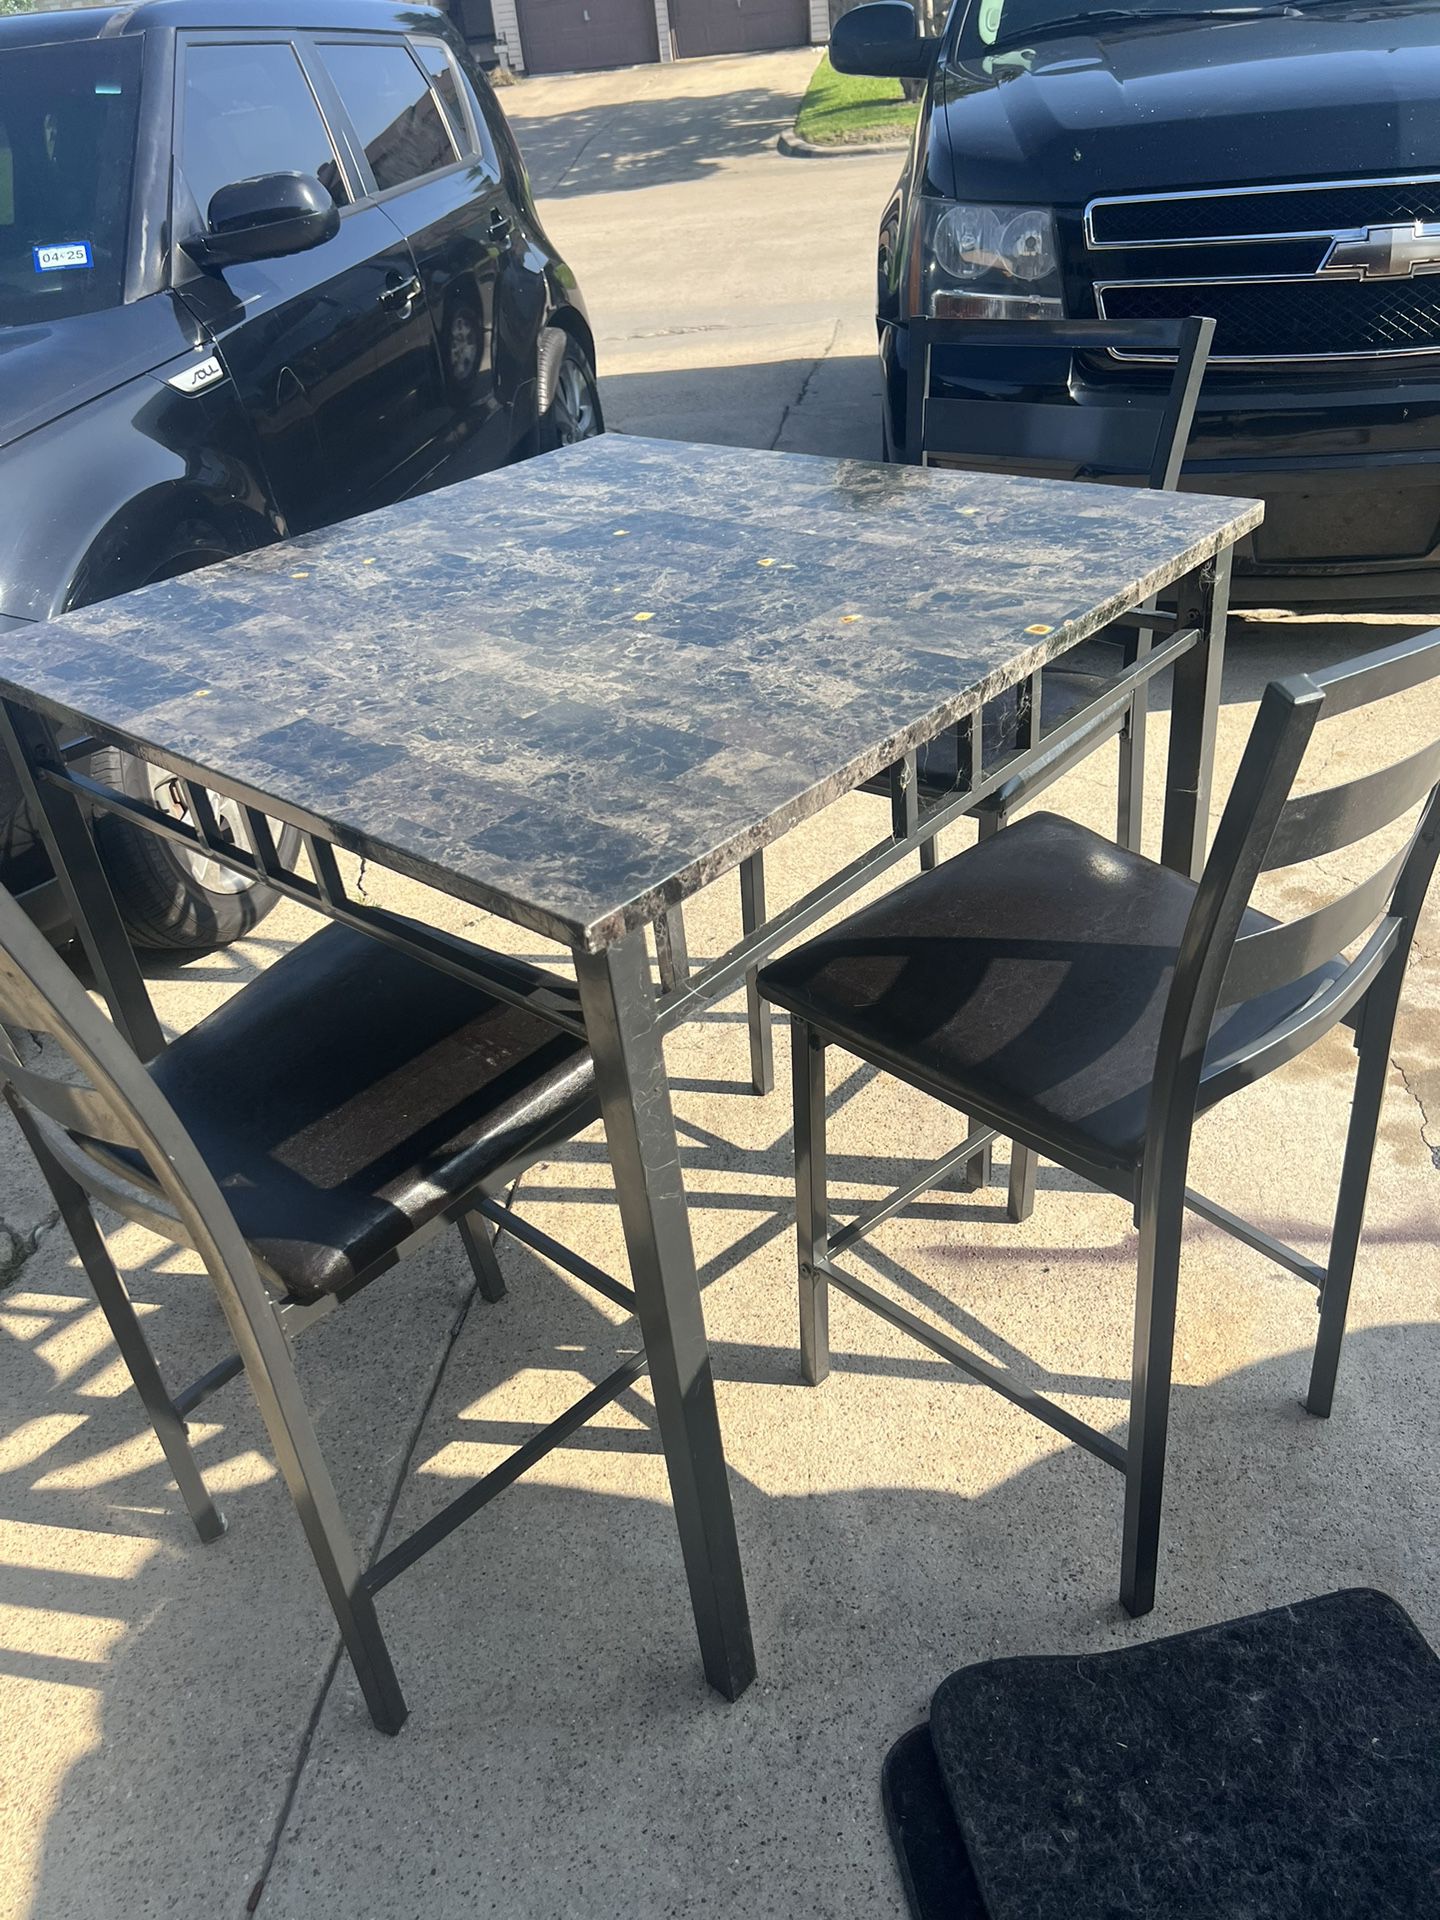 Free Table & chairs